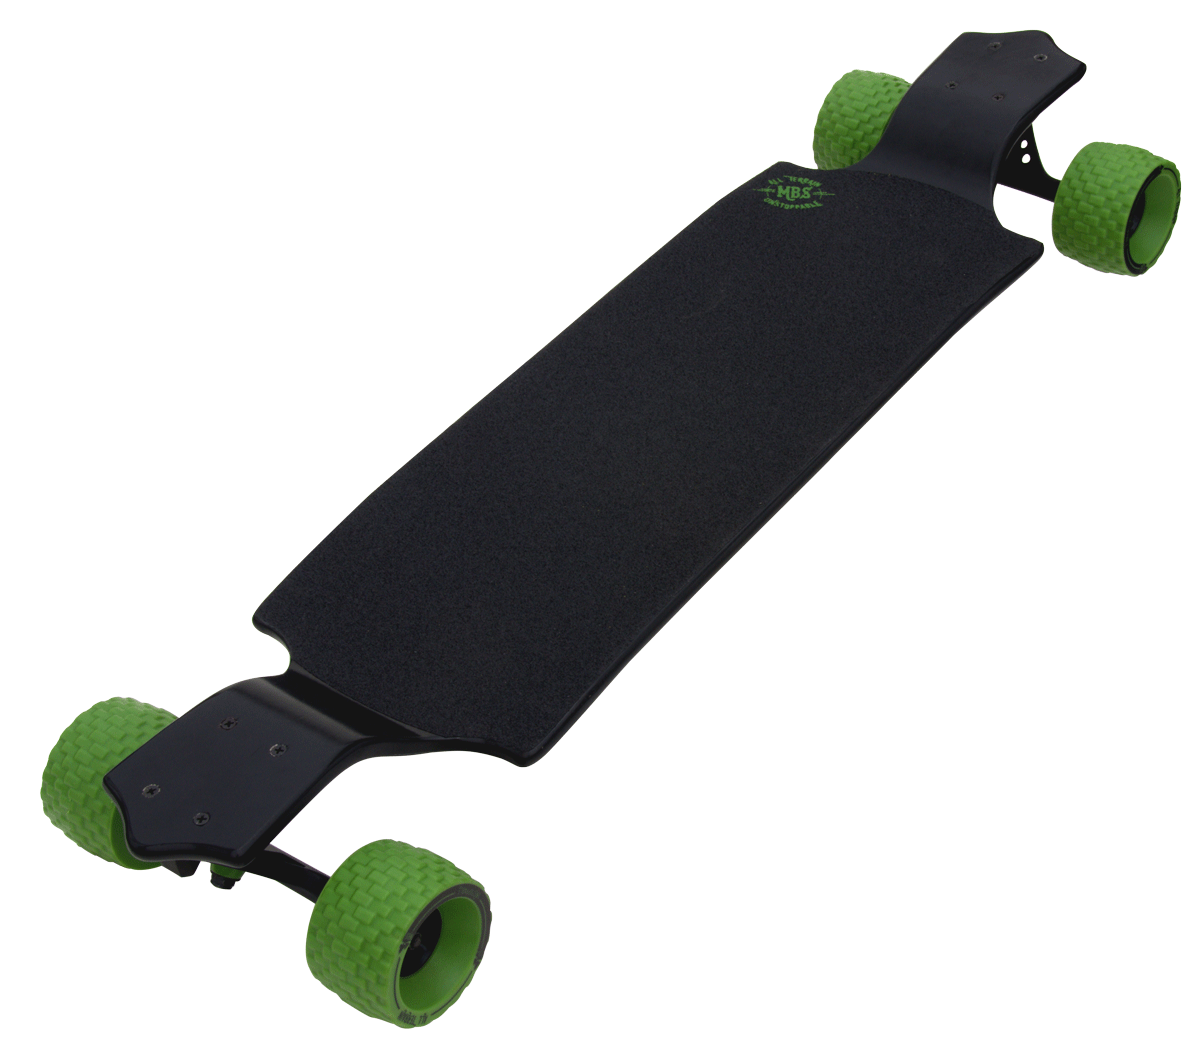 Longboard PNG Image Background